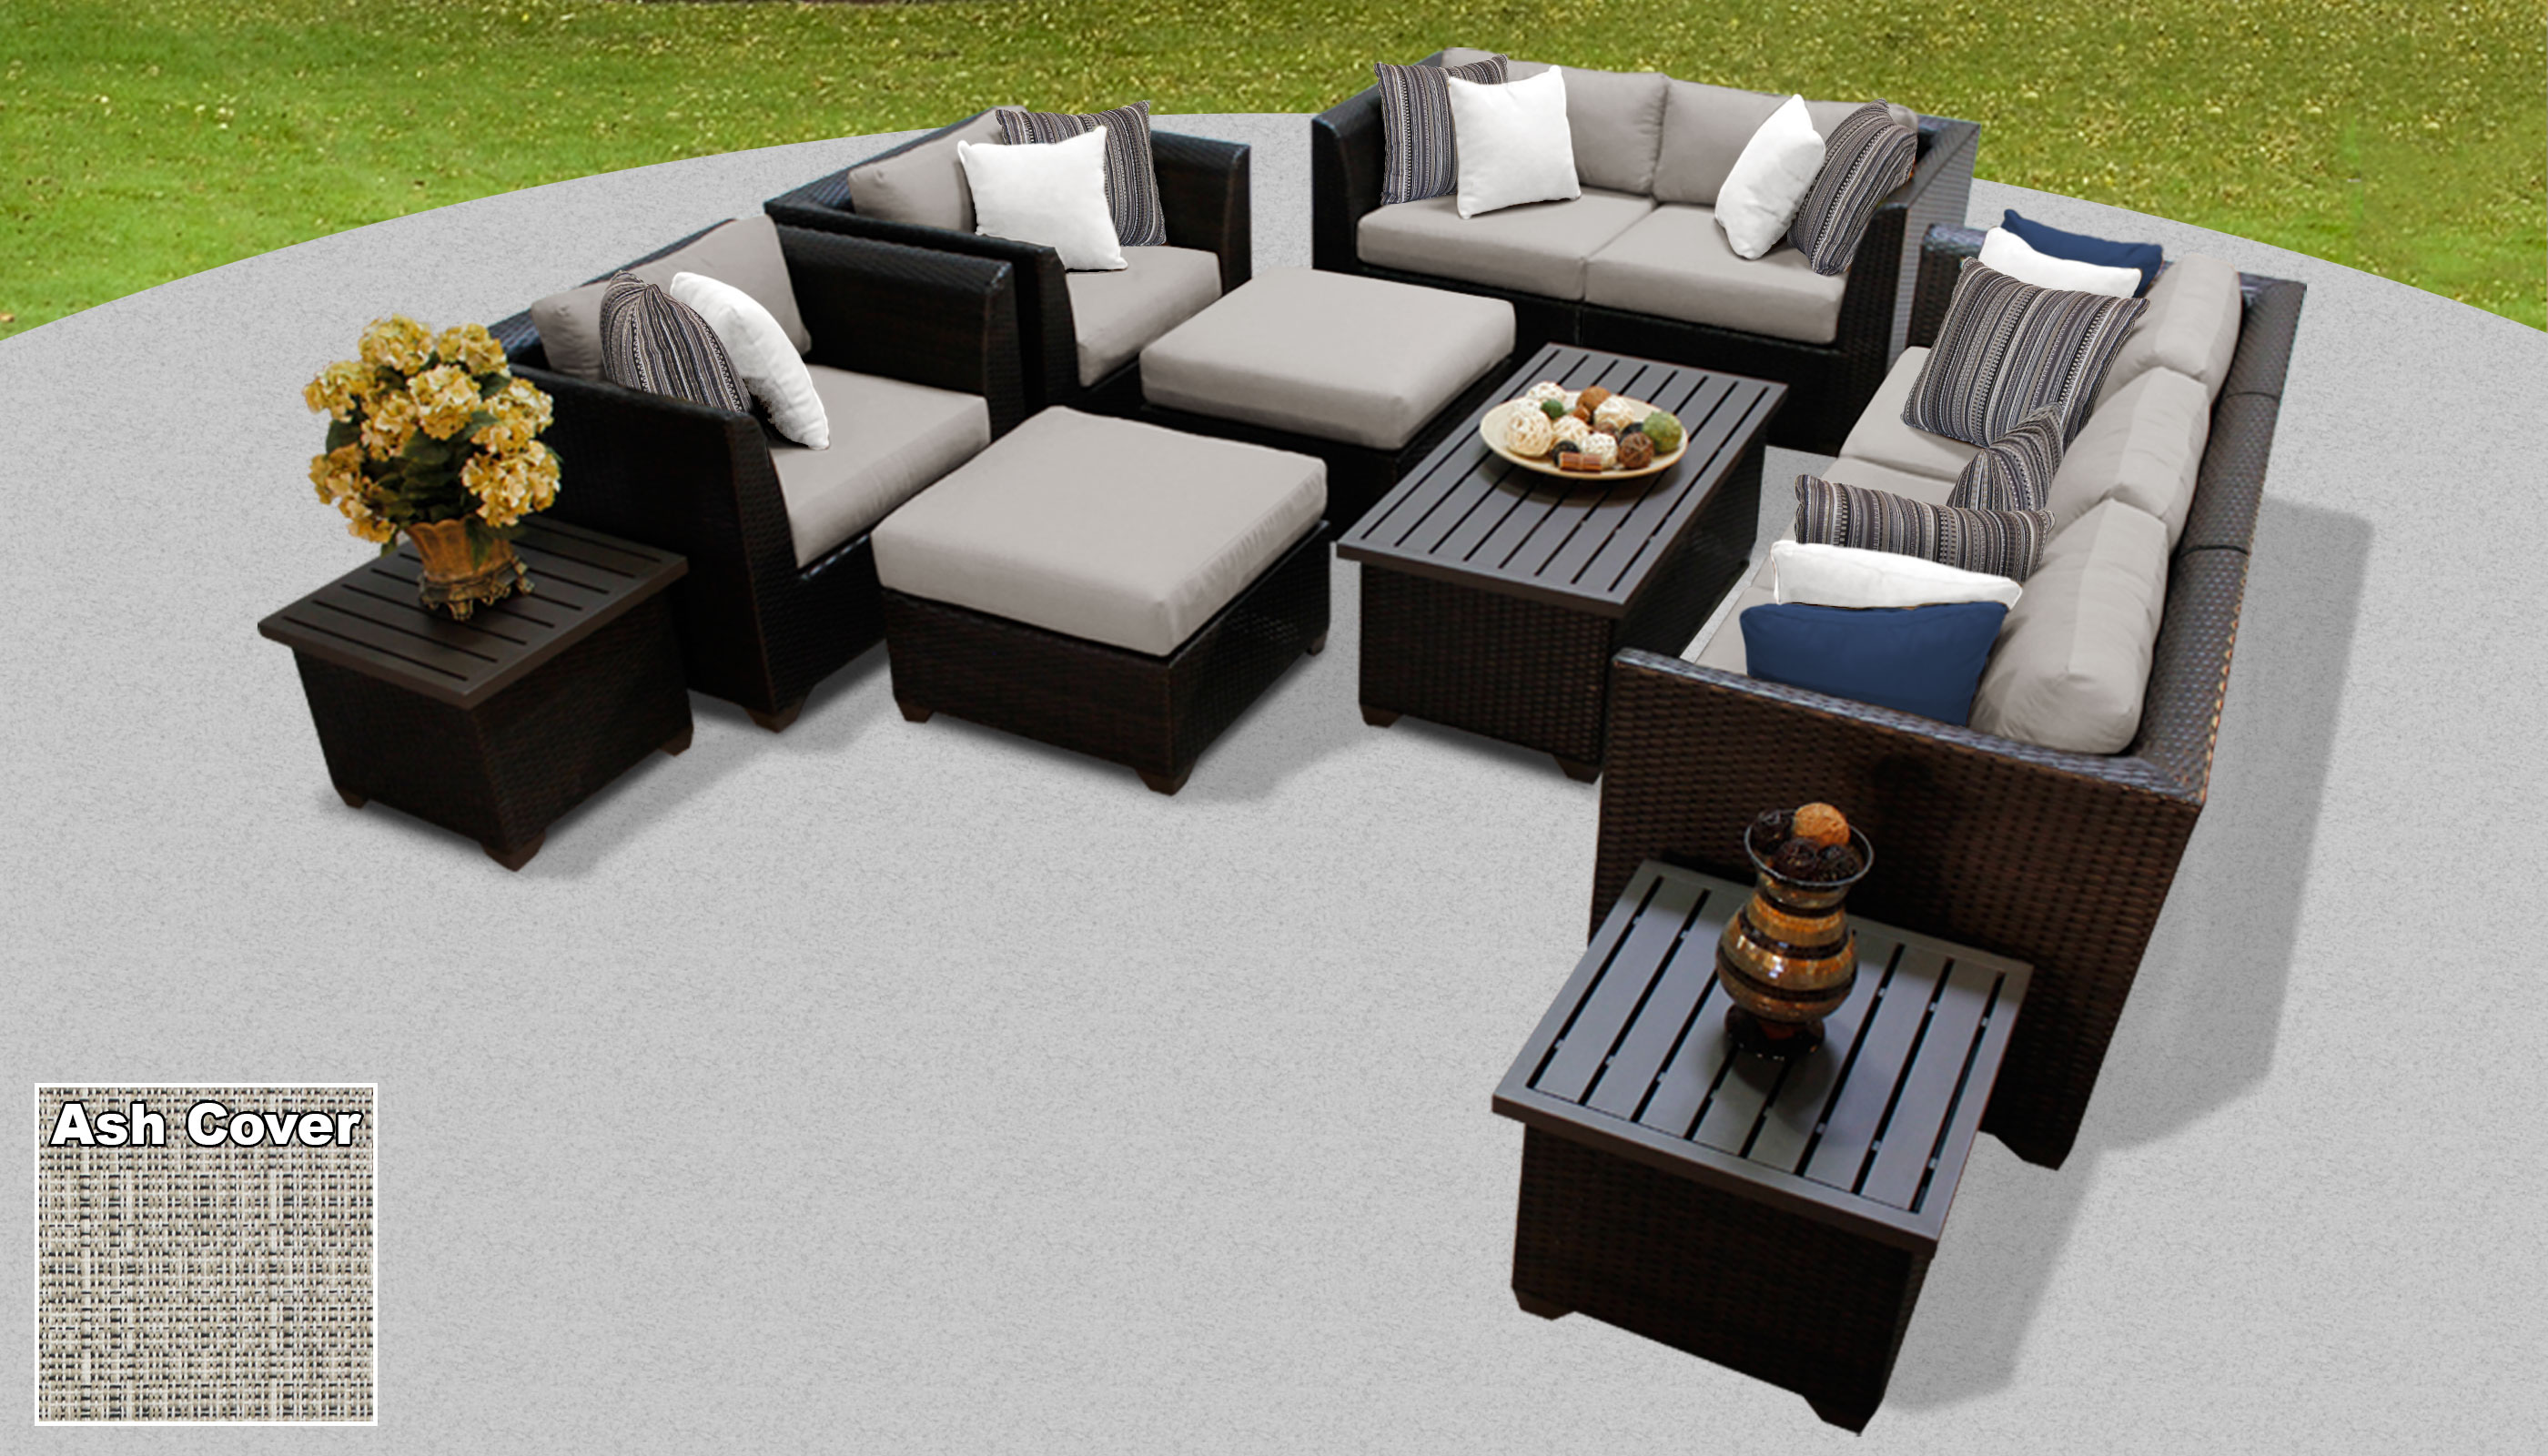 TK Classics Barbados 12 Piece Wicker Outdoor Sectional Seating Group with Storage Coffee Table and End Tables, Ash - image 4 of 11